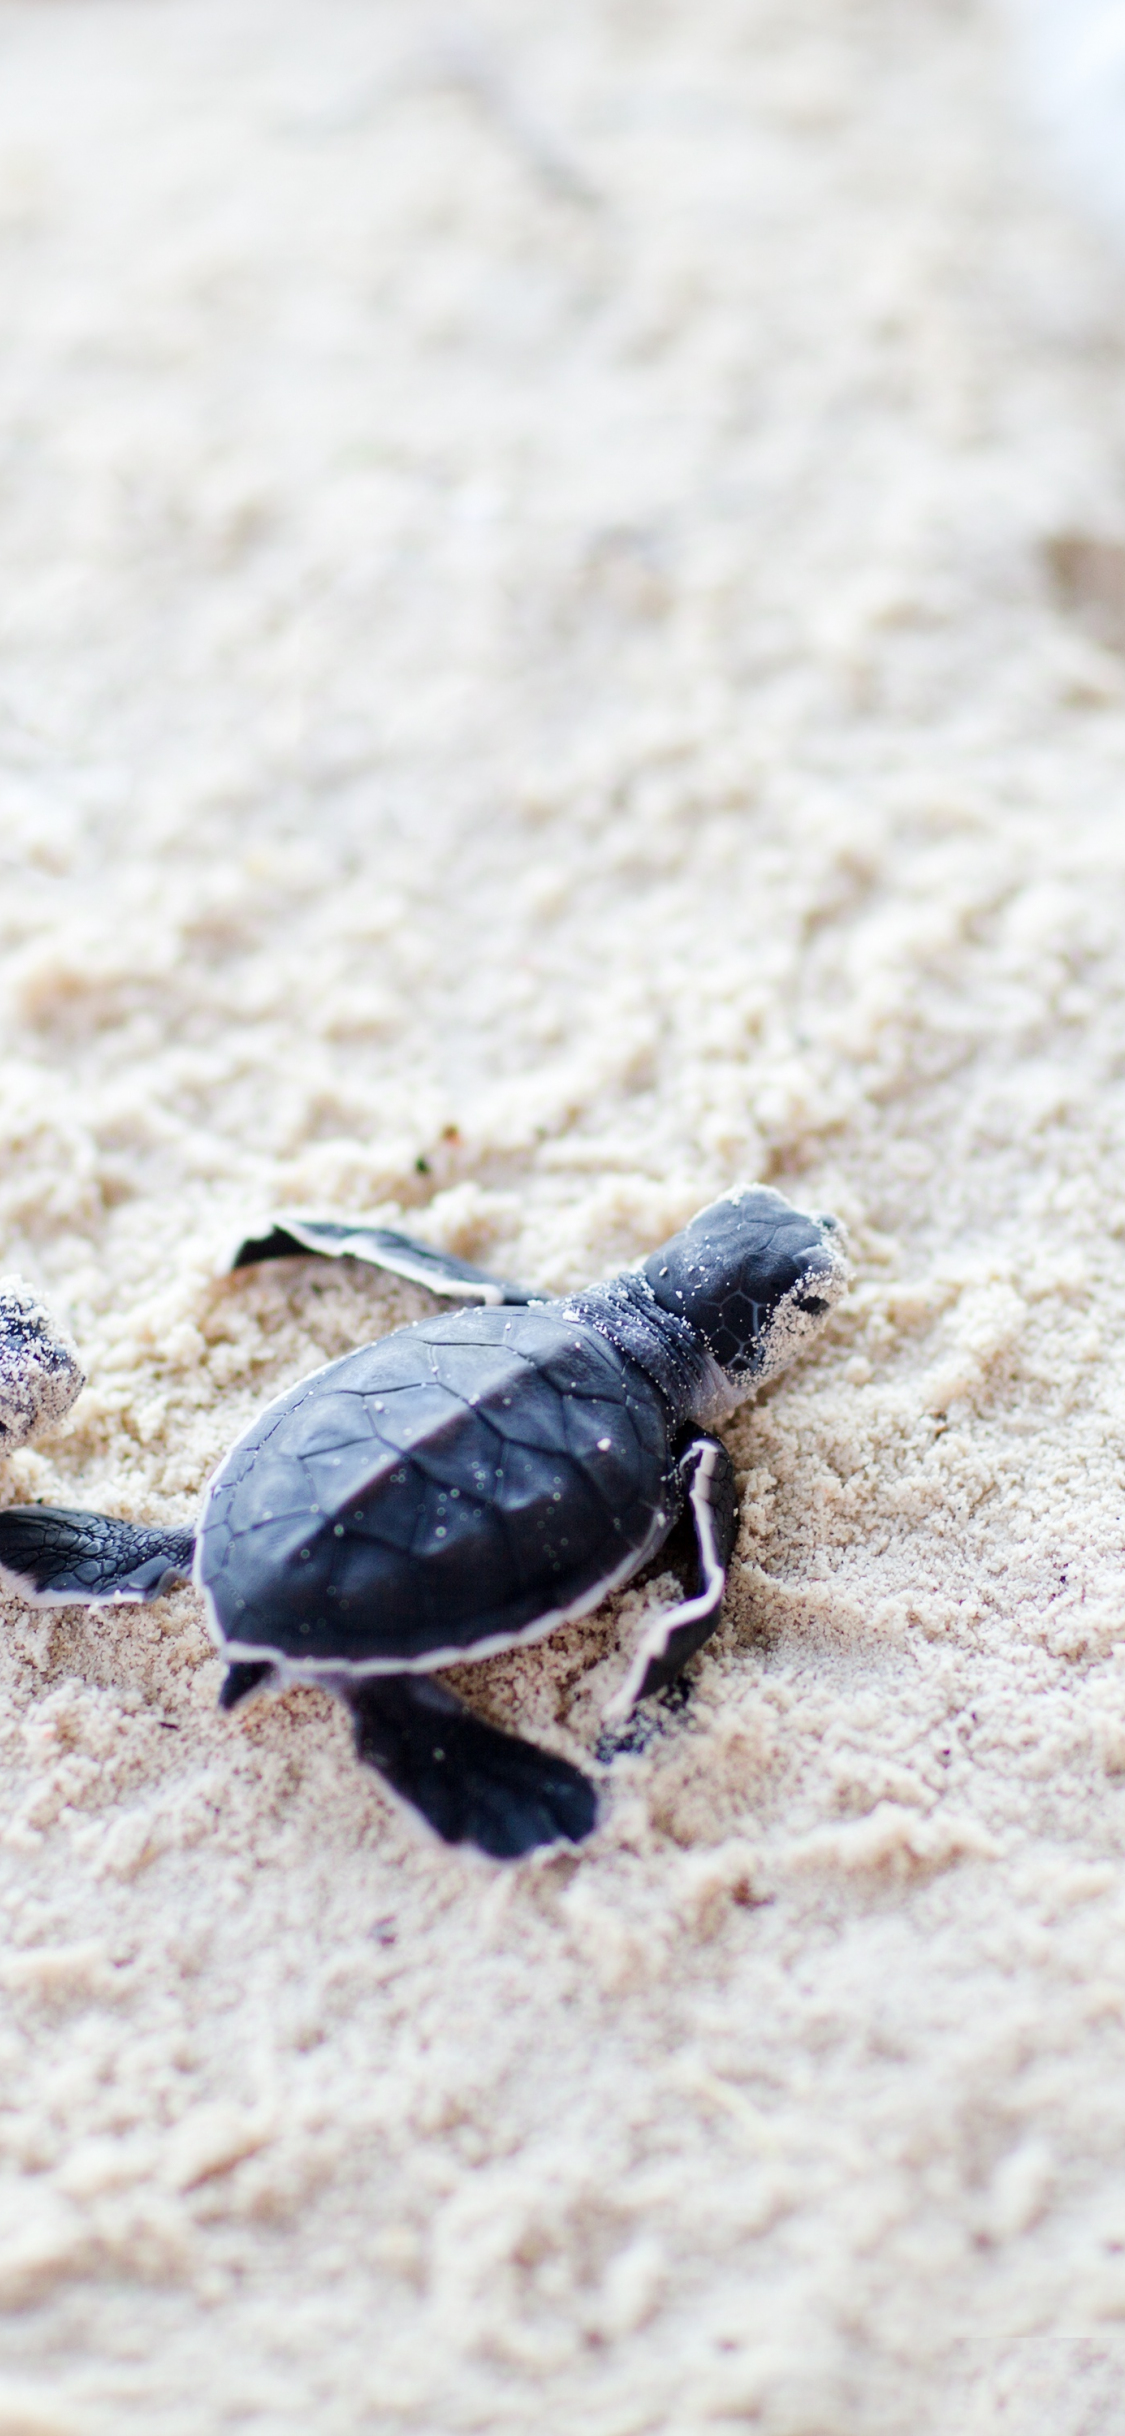 Download 1125x2436 wallpaper cute, baby, turtles, sand, iphone x 1125x2436 HD image, background, 5802